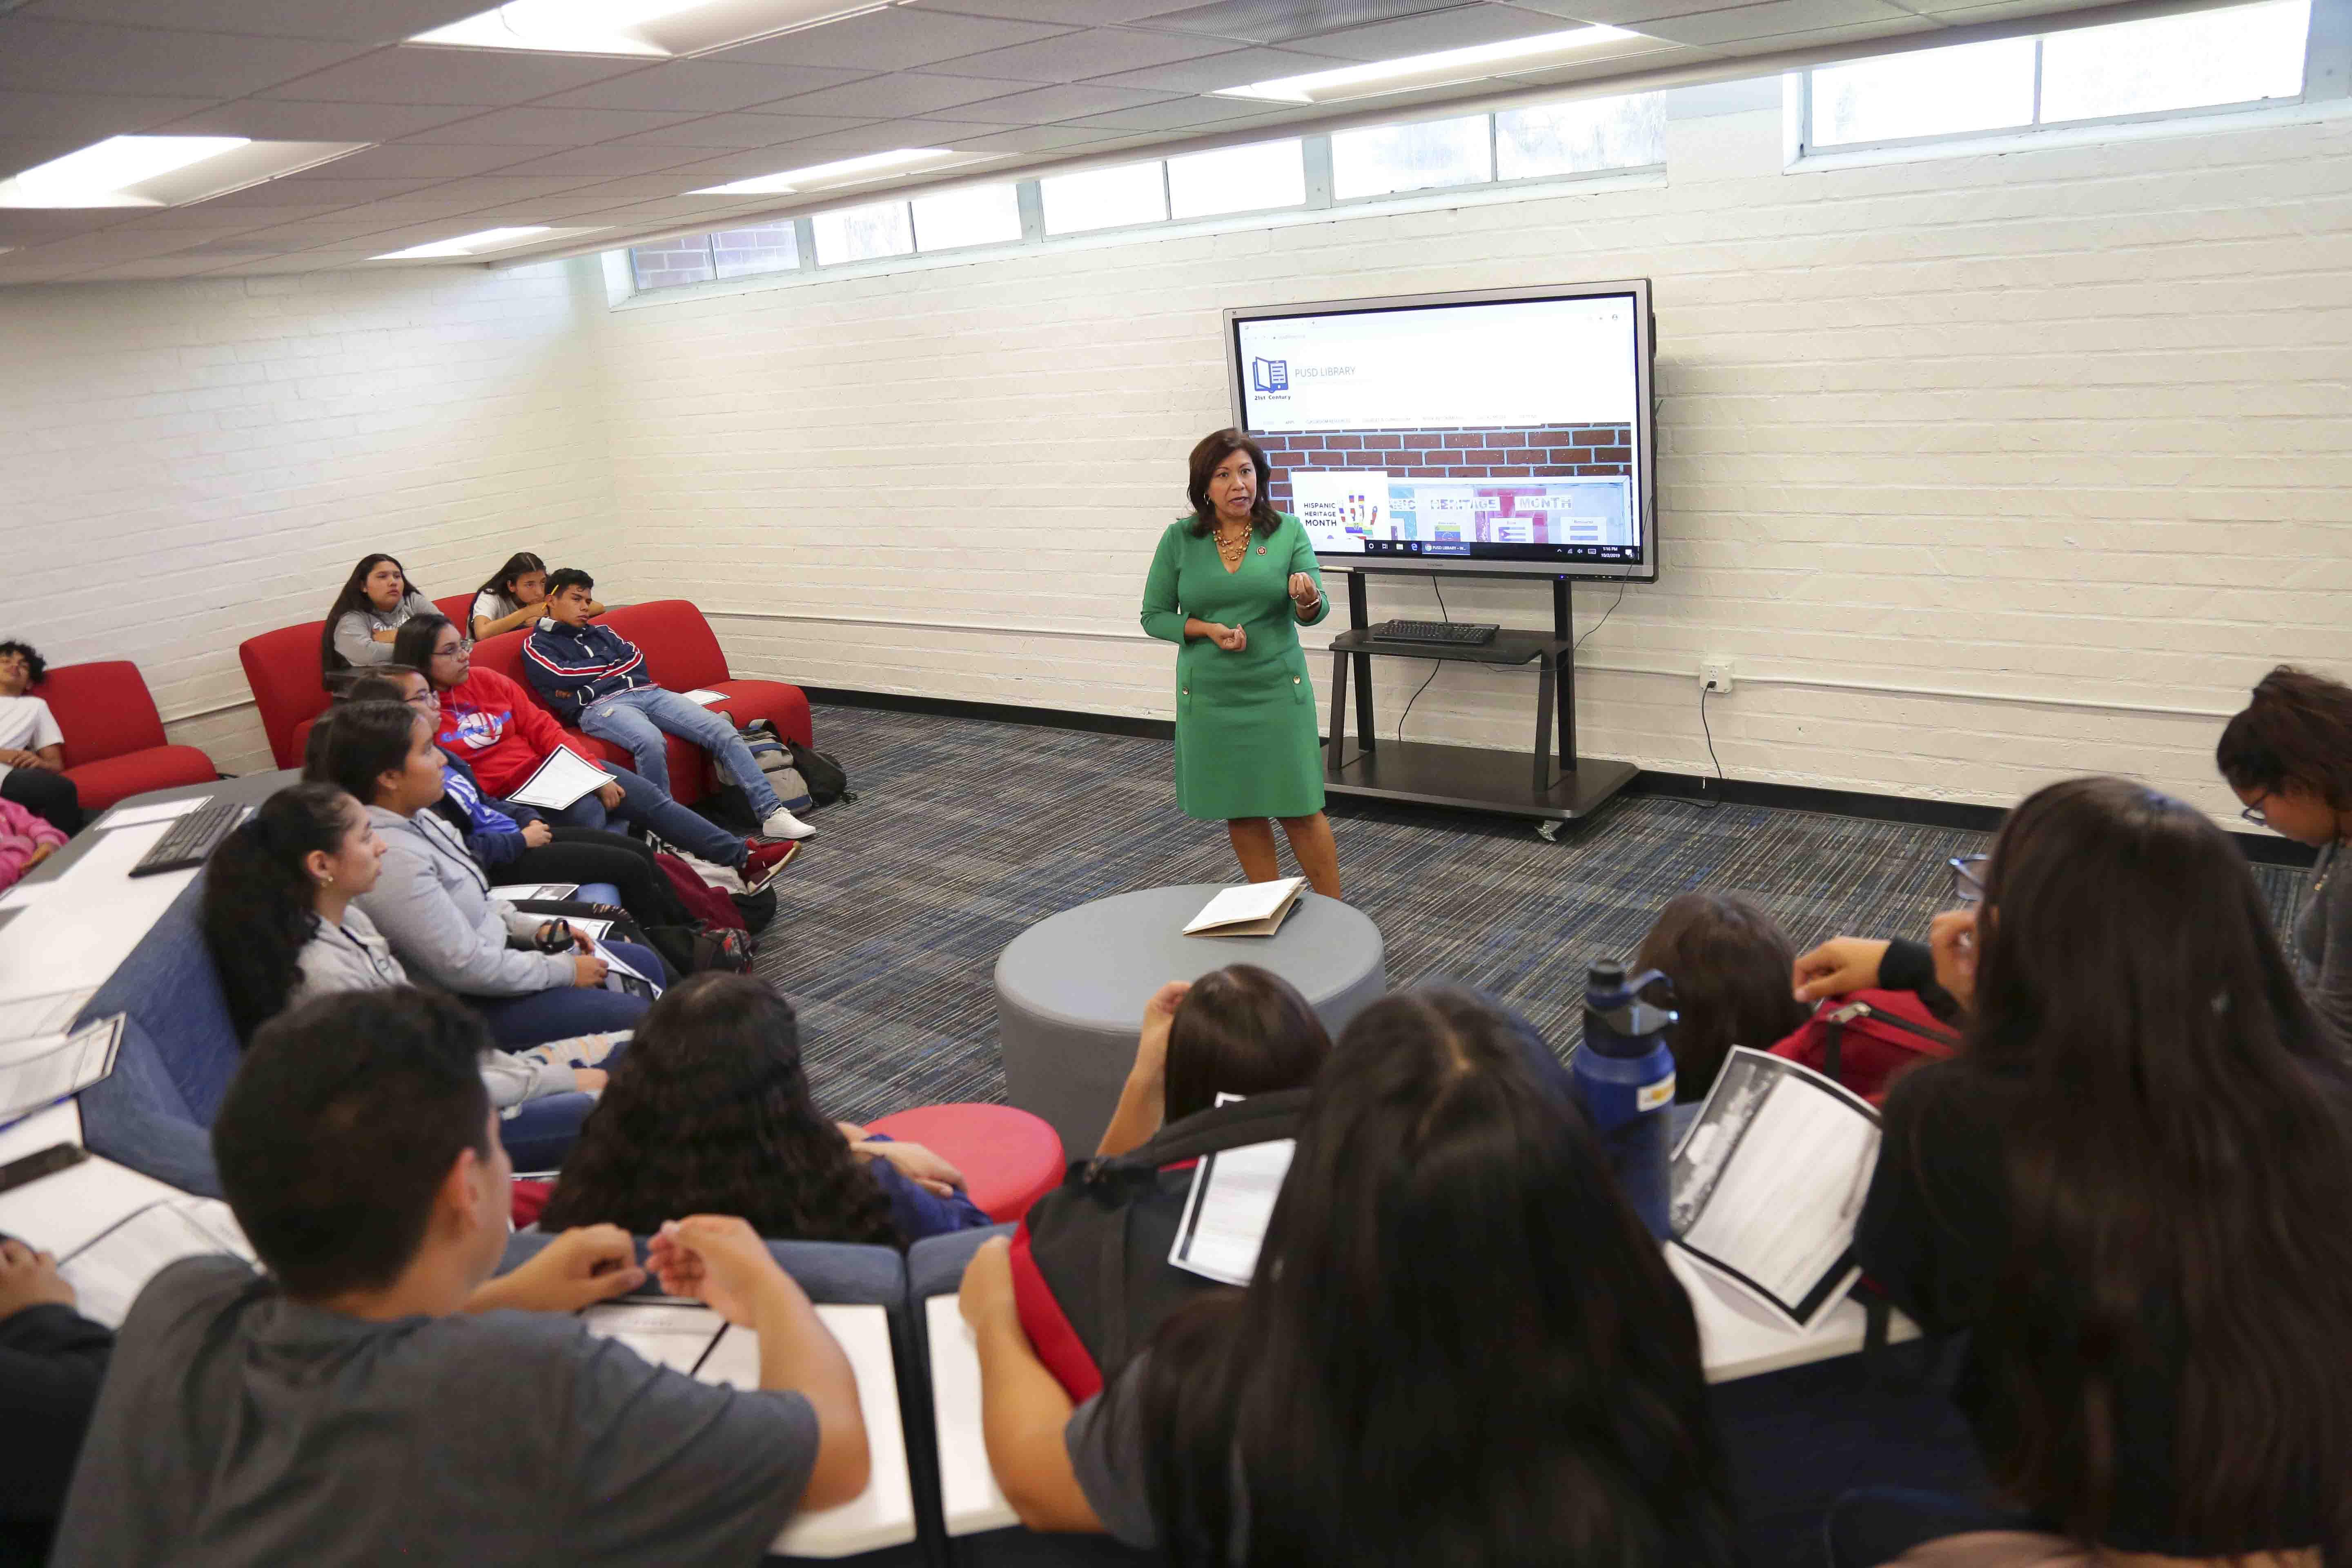 Ganesha High School students had an opportunity to ask questions for Congresswoman Torres during her visit at the Ganesha Library #PUSD #Proud2bepusd #GaneshaGIANTS